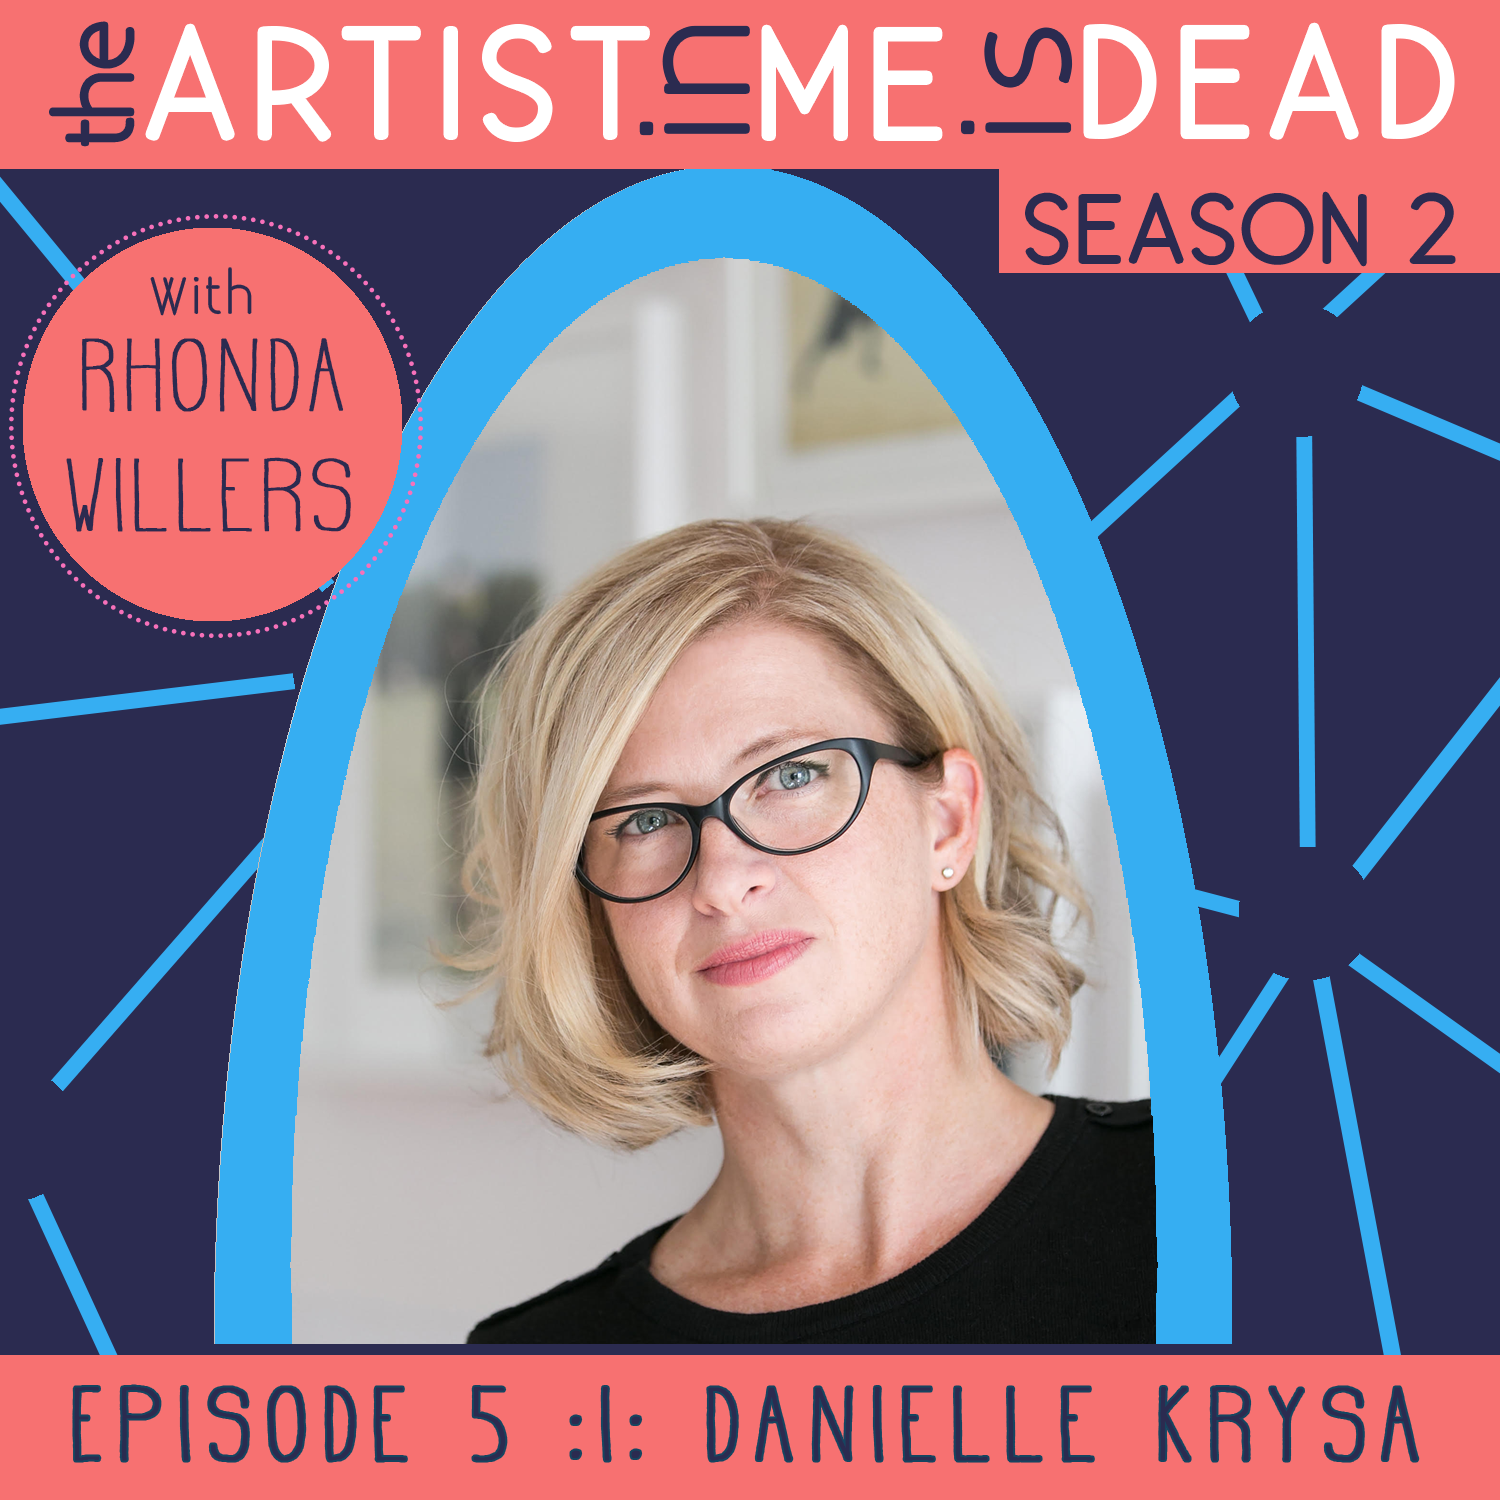 01_S2E5_Danielle-Krysa_The-Artist-In-Me-Is-Dead-Podcast_IG_square.png